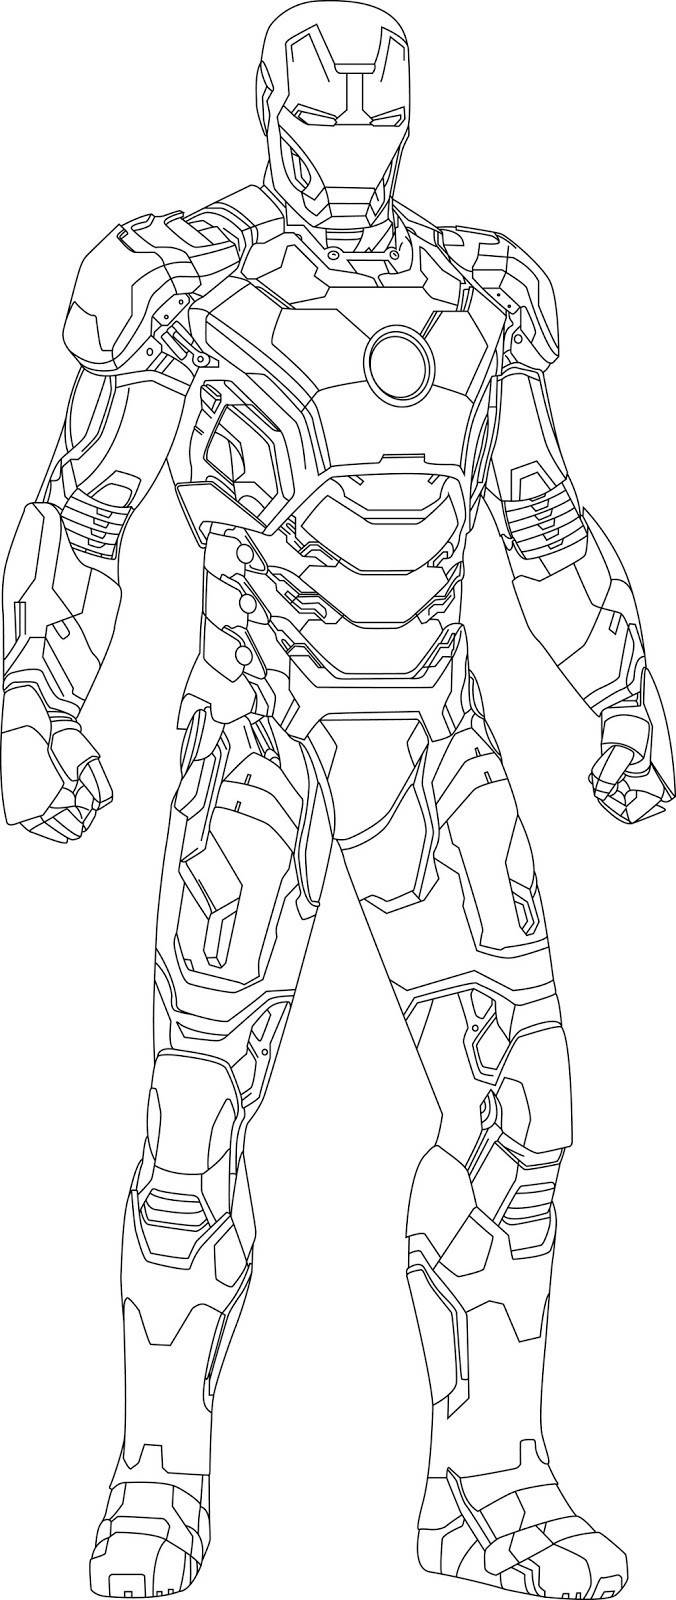 Avengers Coloring Pages Printable
 Coloring pages for kids free images Iron Man Avengers